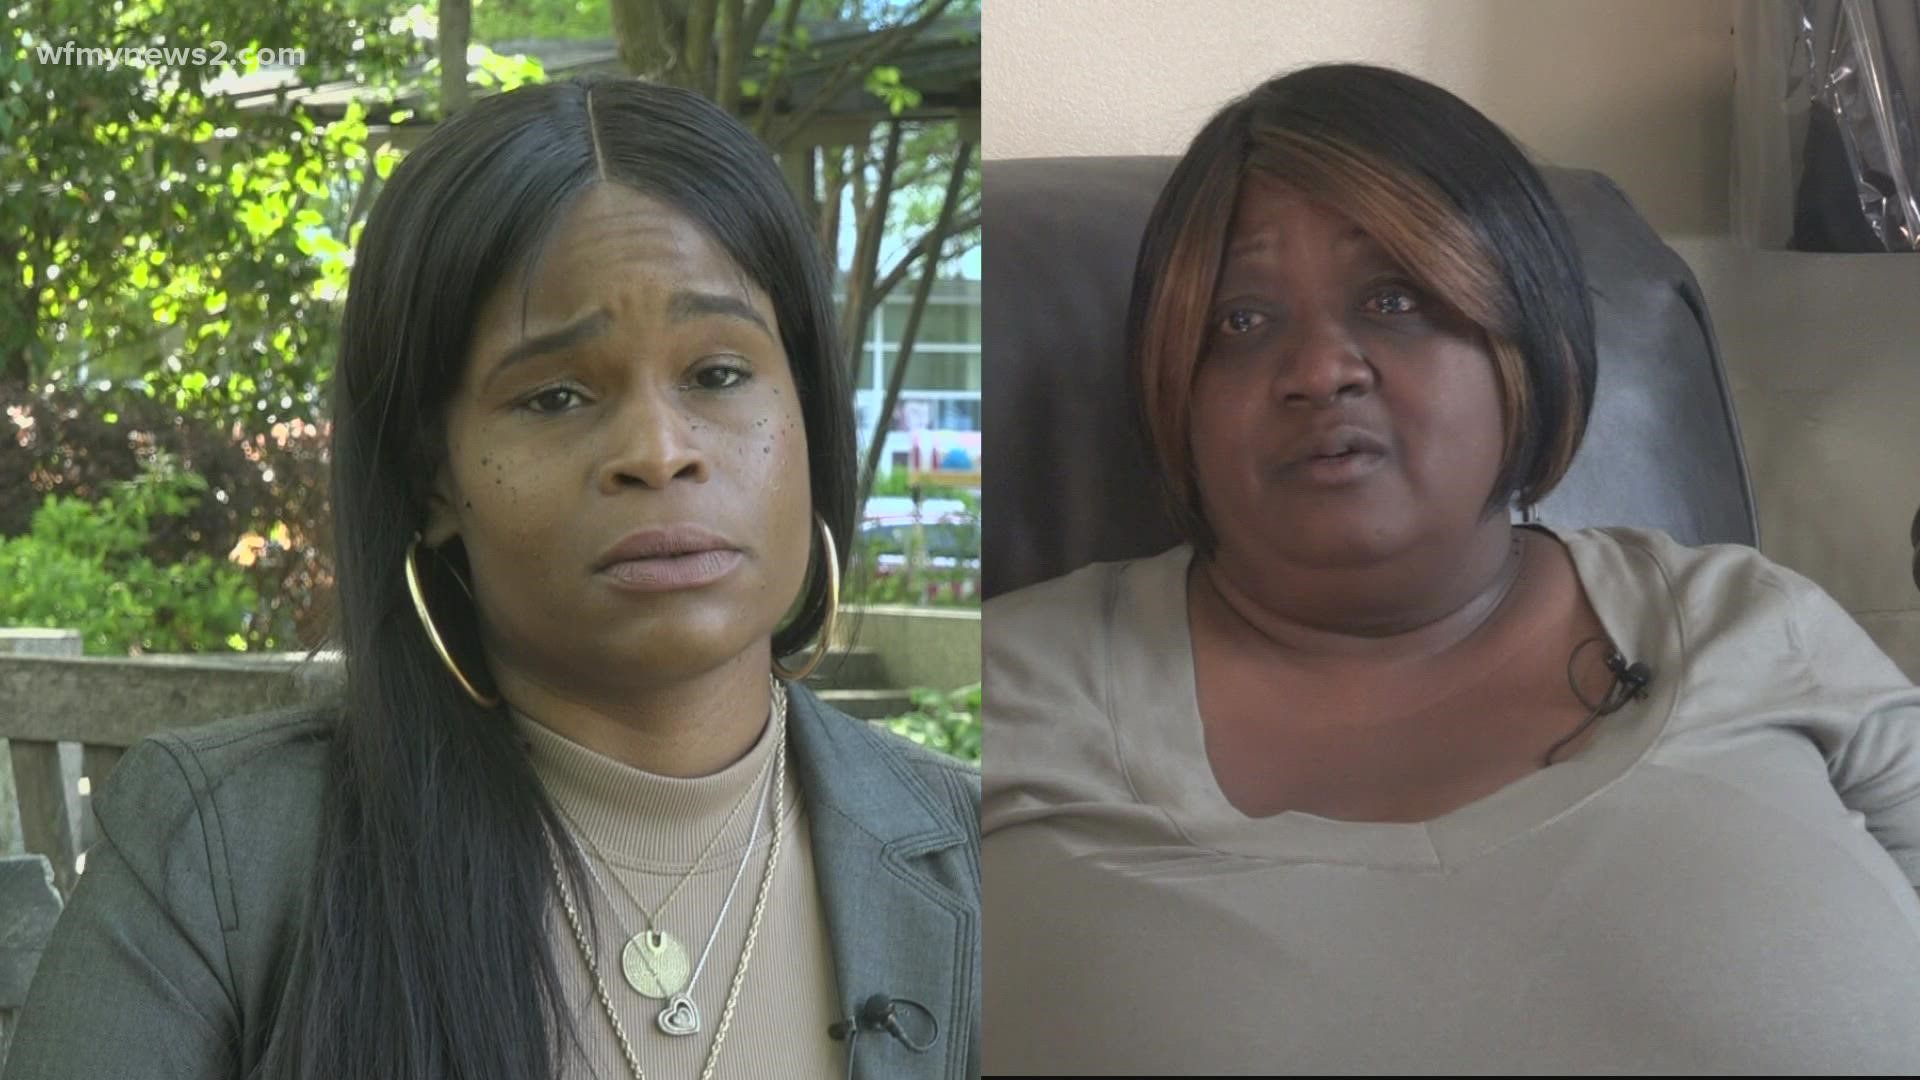 Basil Wilson died in 2021. Shaquanna Hudson died in 2018. Their mothers said they're desperate for answers.